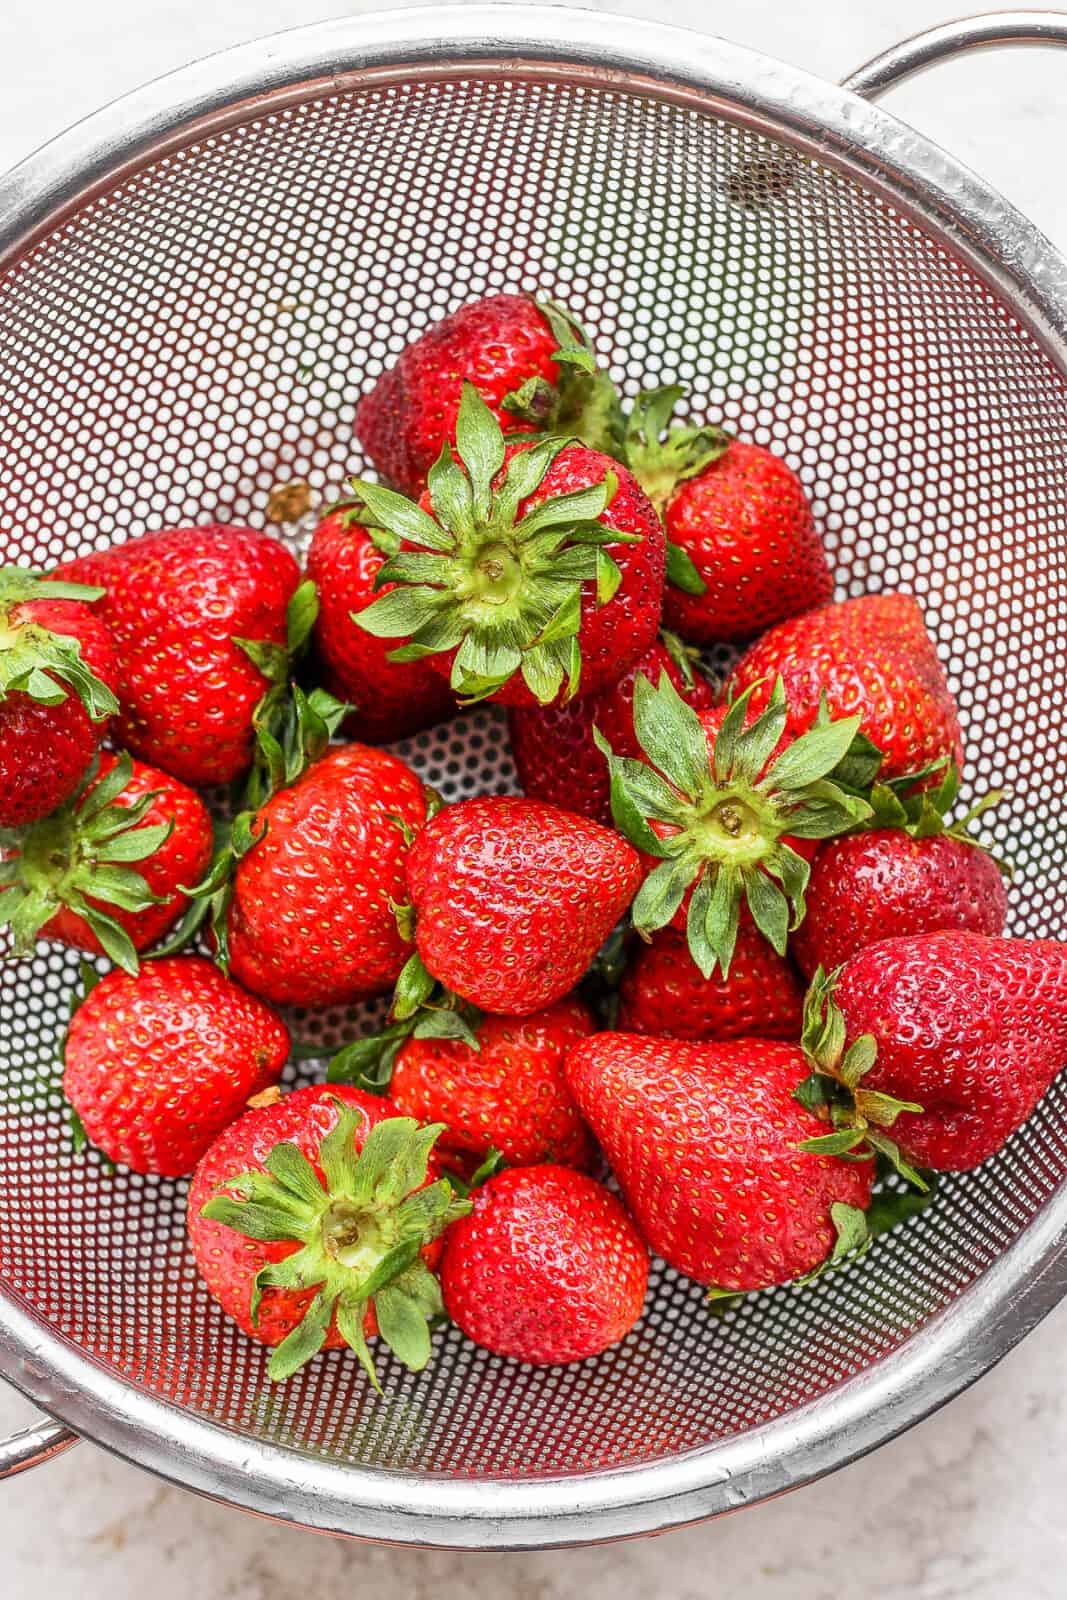 Whole strawberries in a colander.